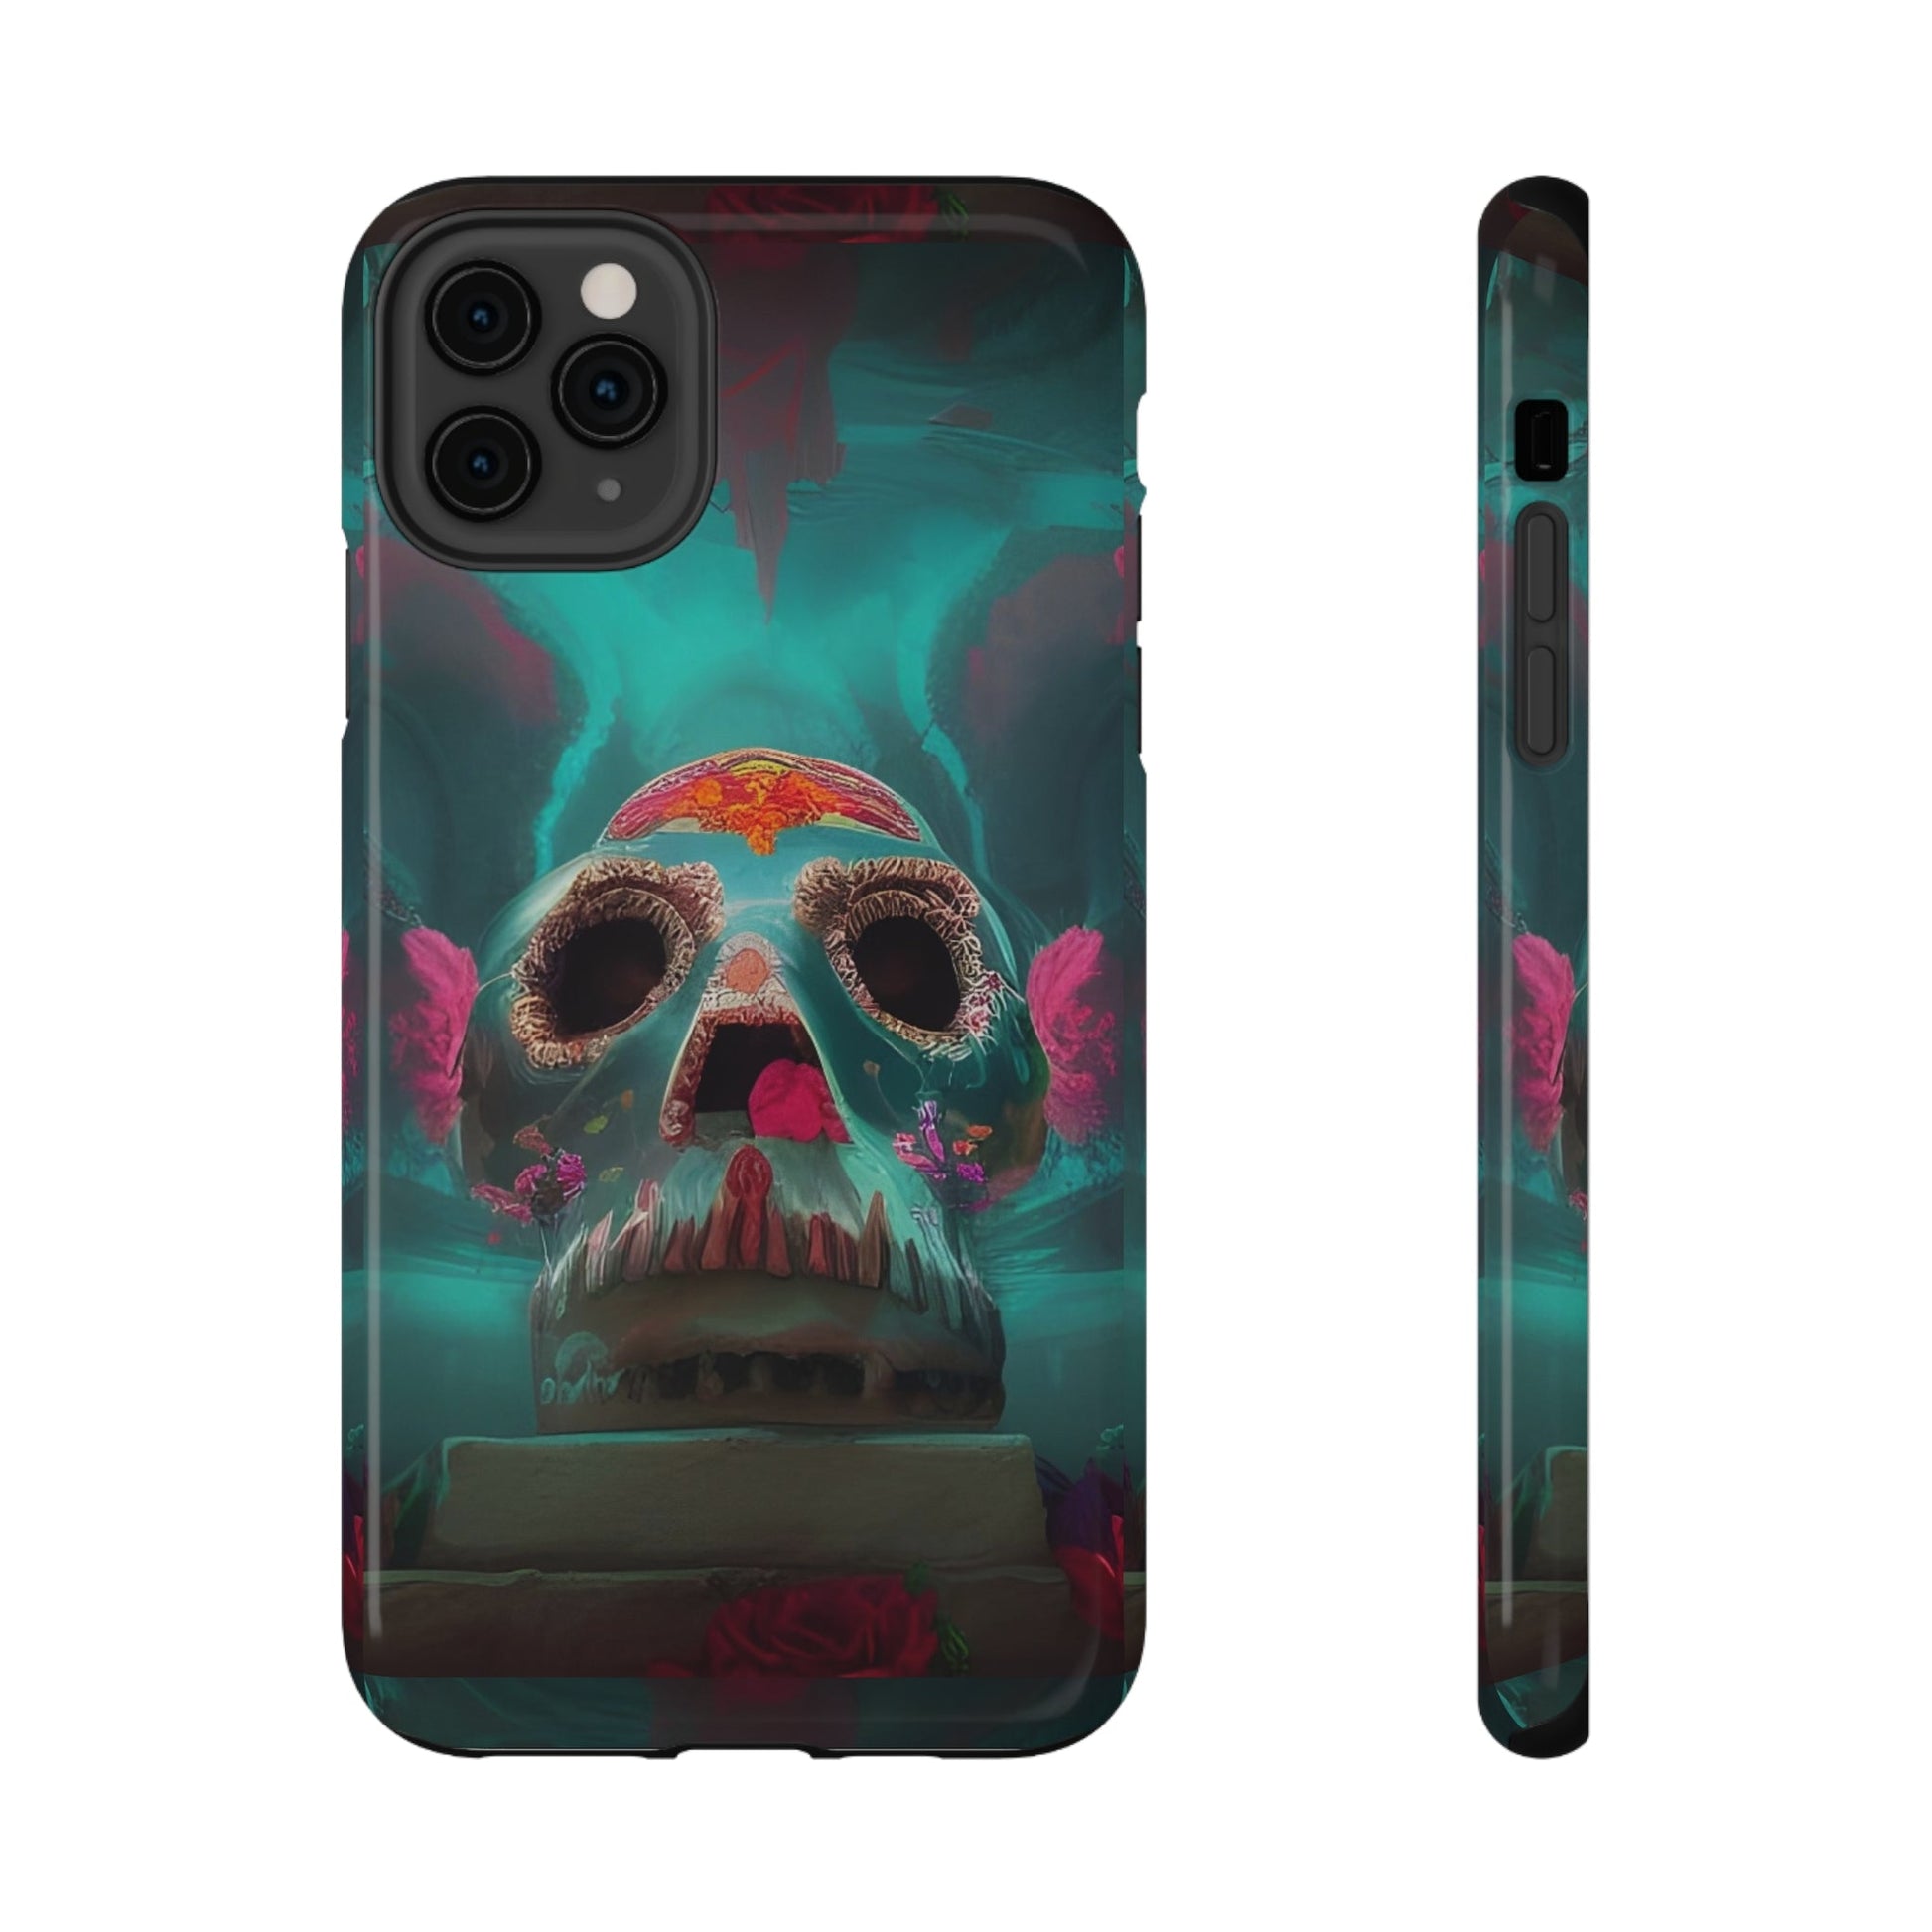 Happy Cinco de mayo skull on a pedestal Impact-Resistant Cases for iPhone and Samsung-Shalav5